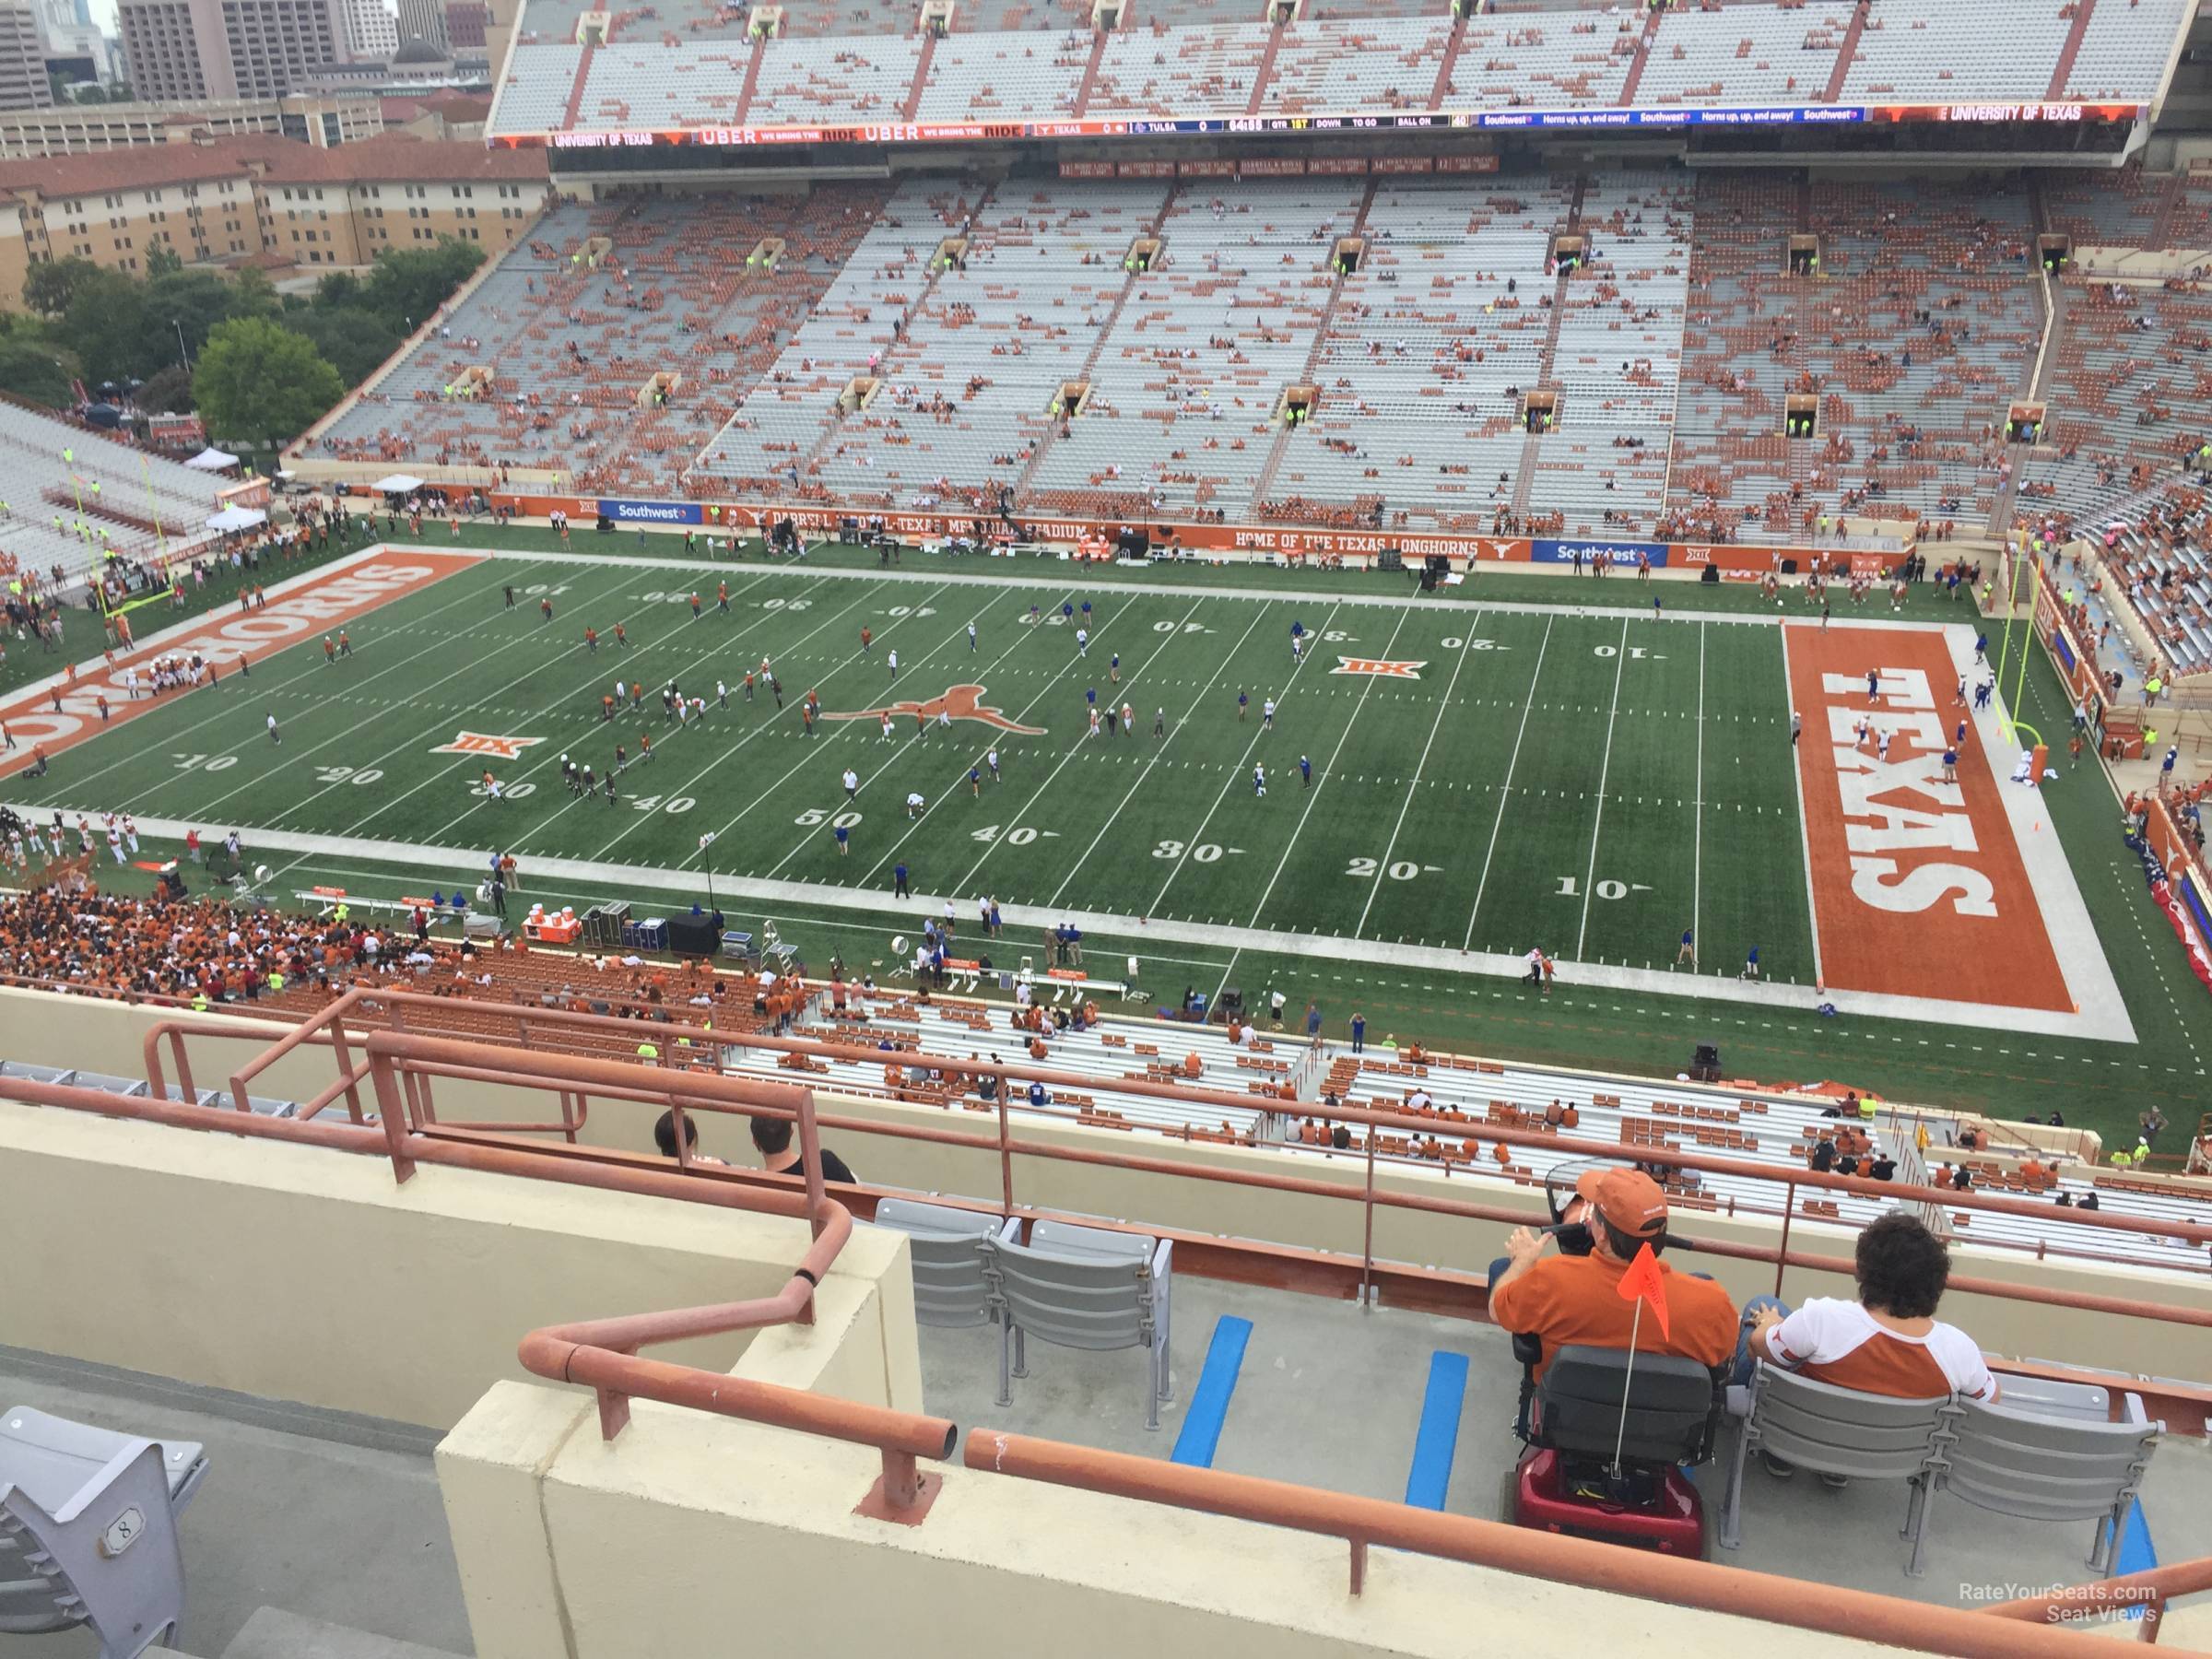 section 125, row 10 seat view  - dkr-texas memorial stadium